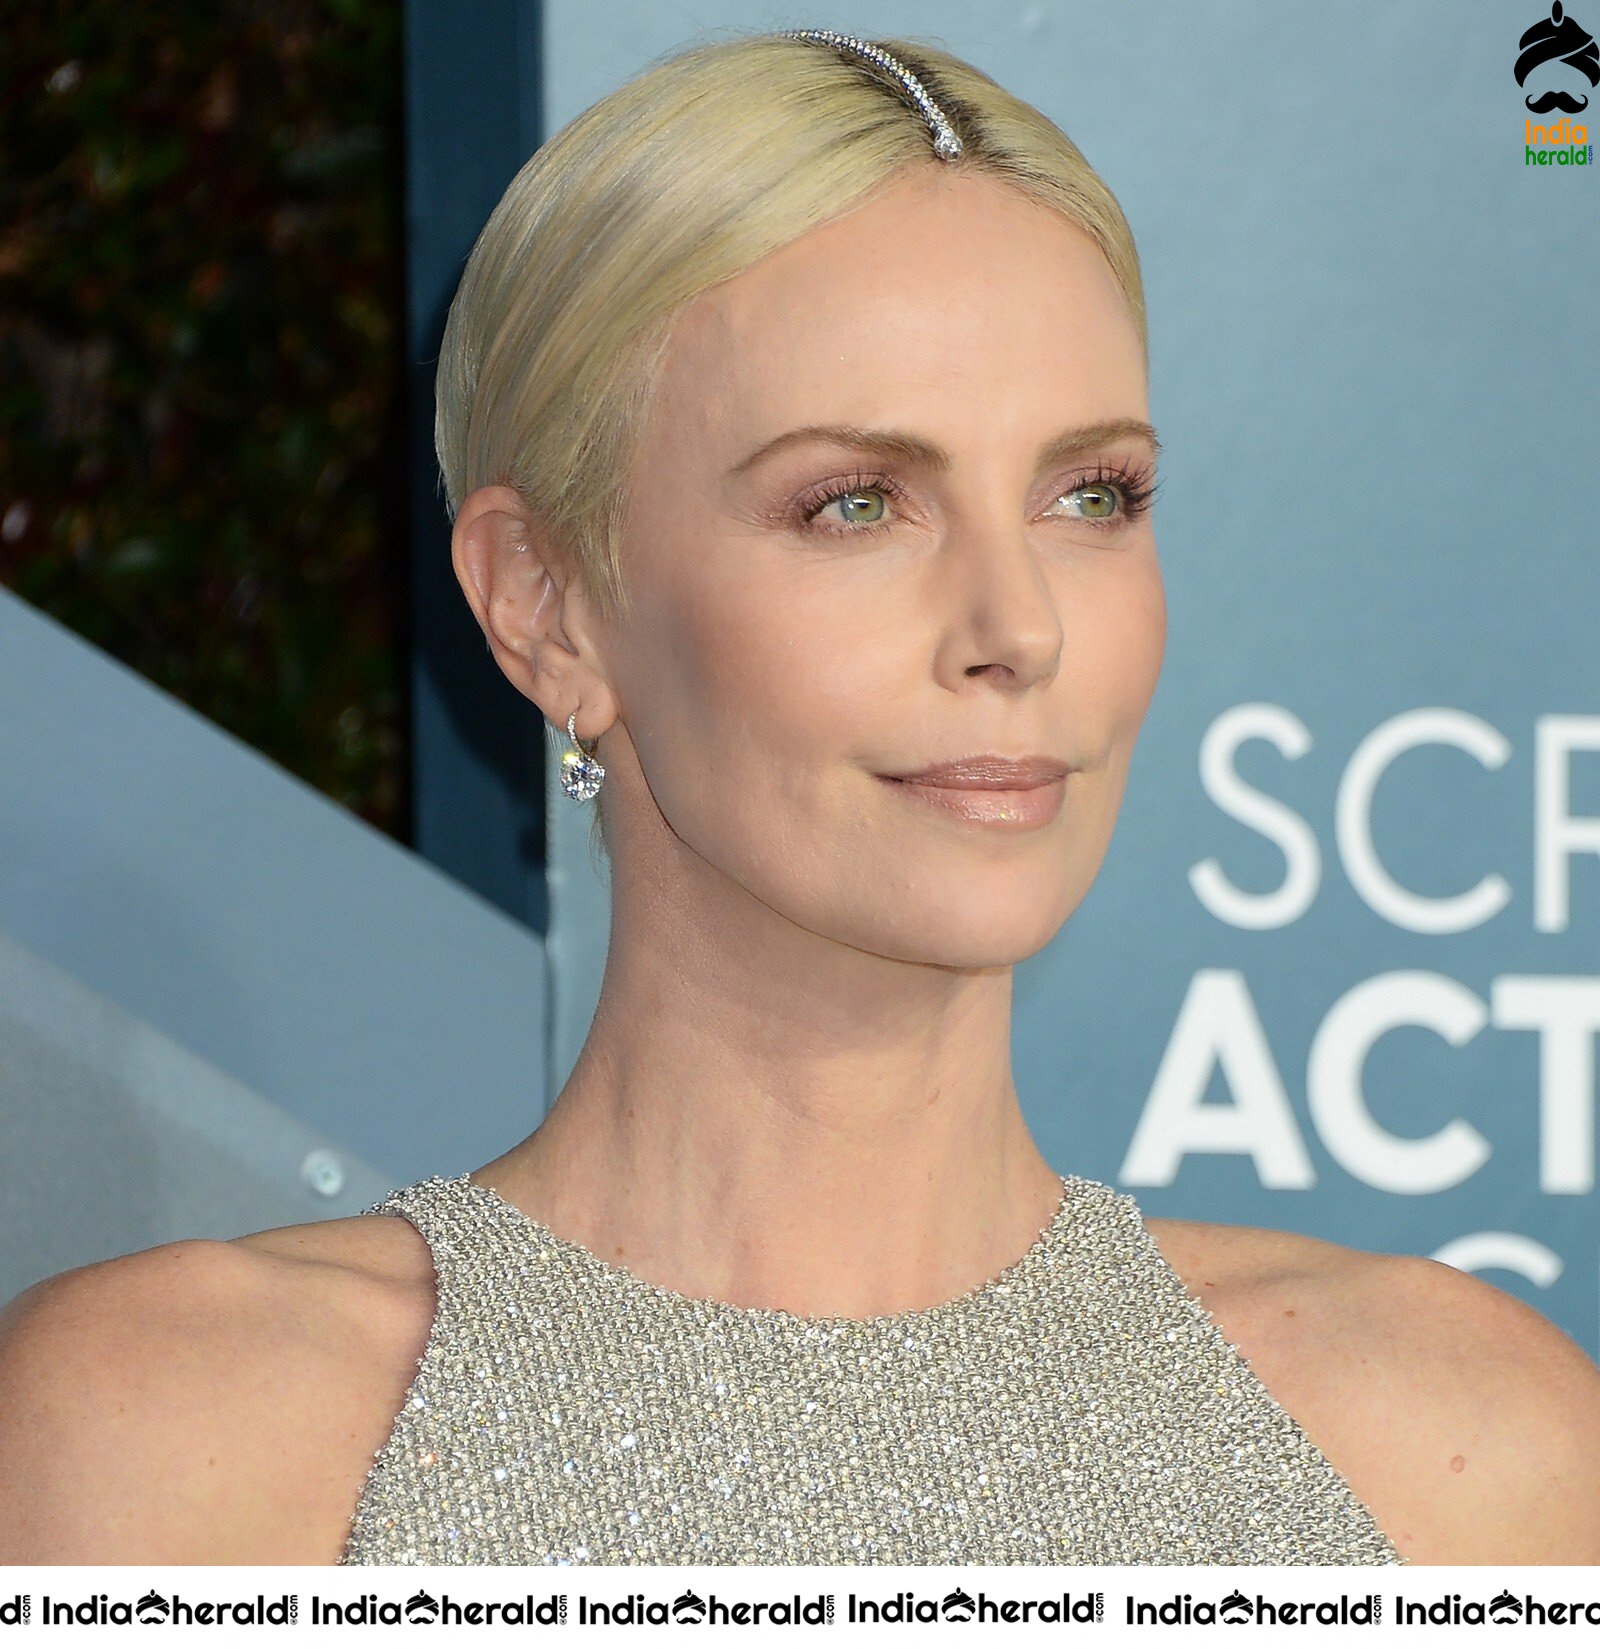 Charlize Theron at 26th Annual Screen Actors Guild Awards Shrine Auditorium in LA Set 1